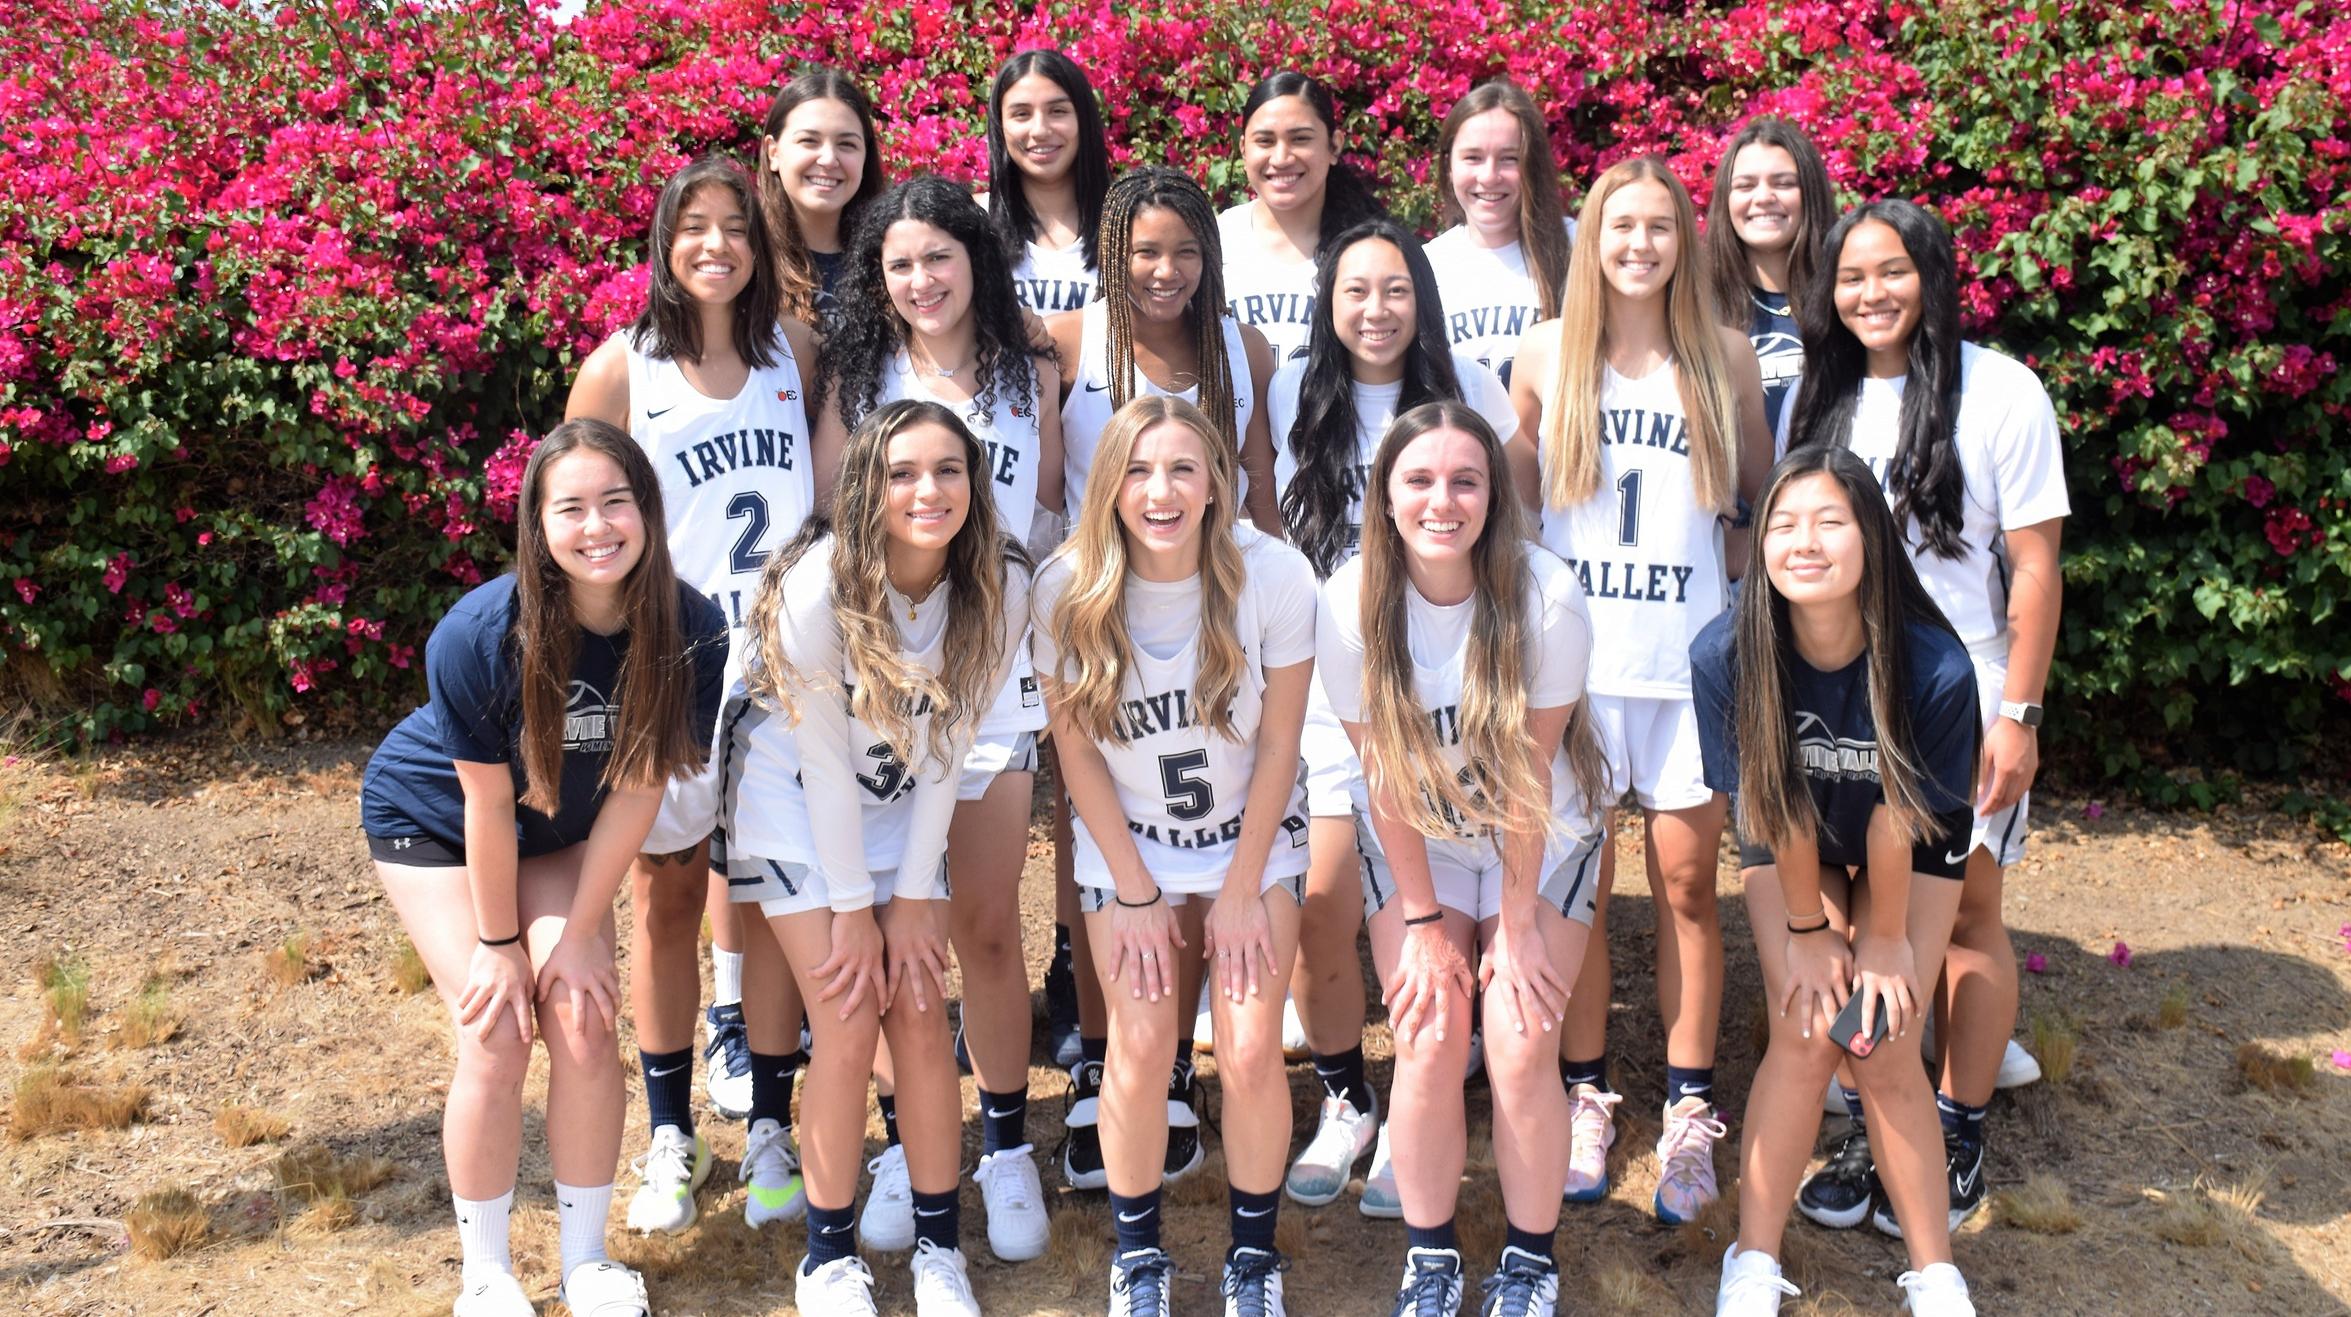 Women's basketball team stays at No. 1 in So. Cal latest poll